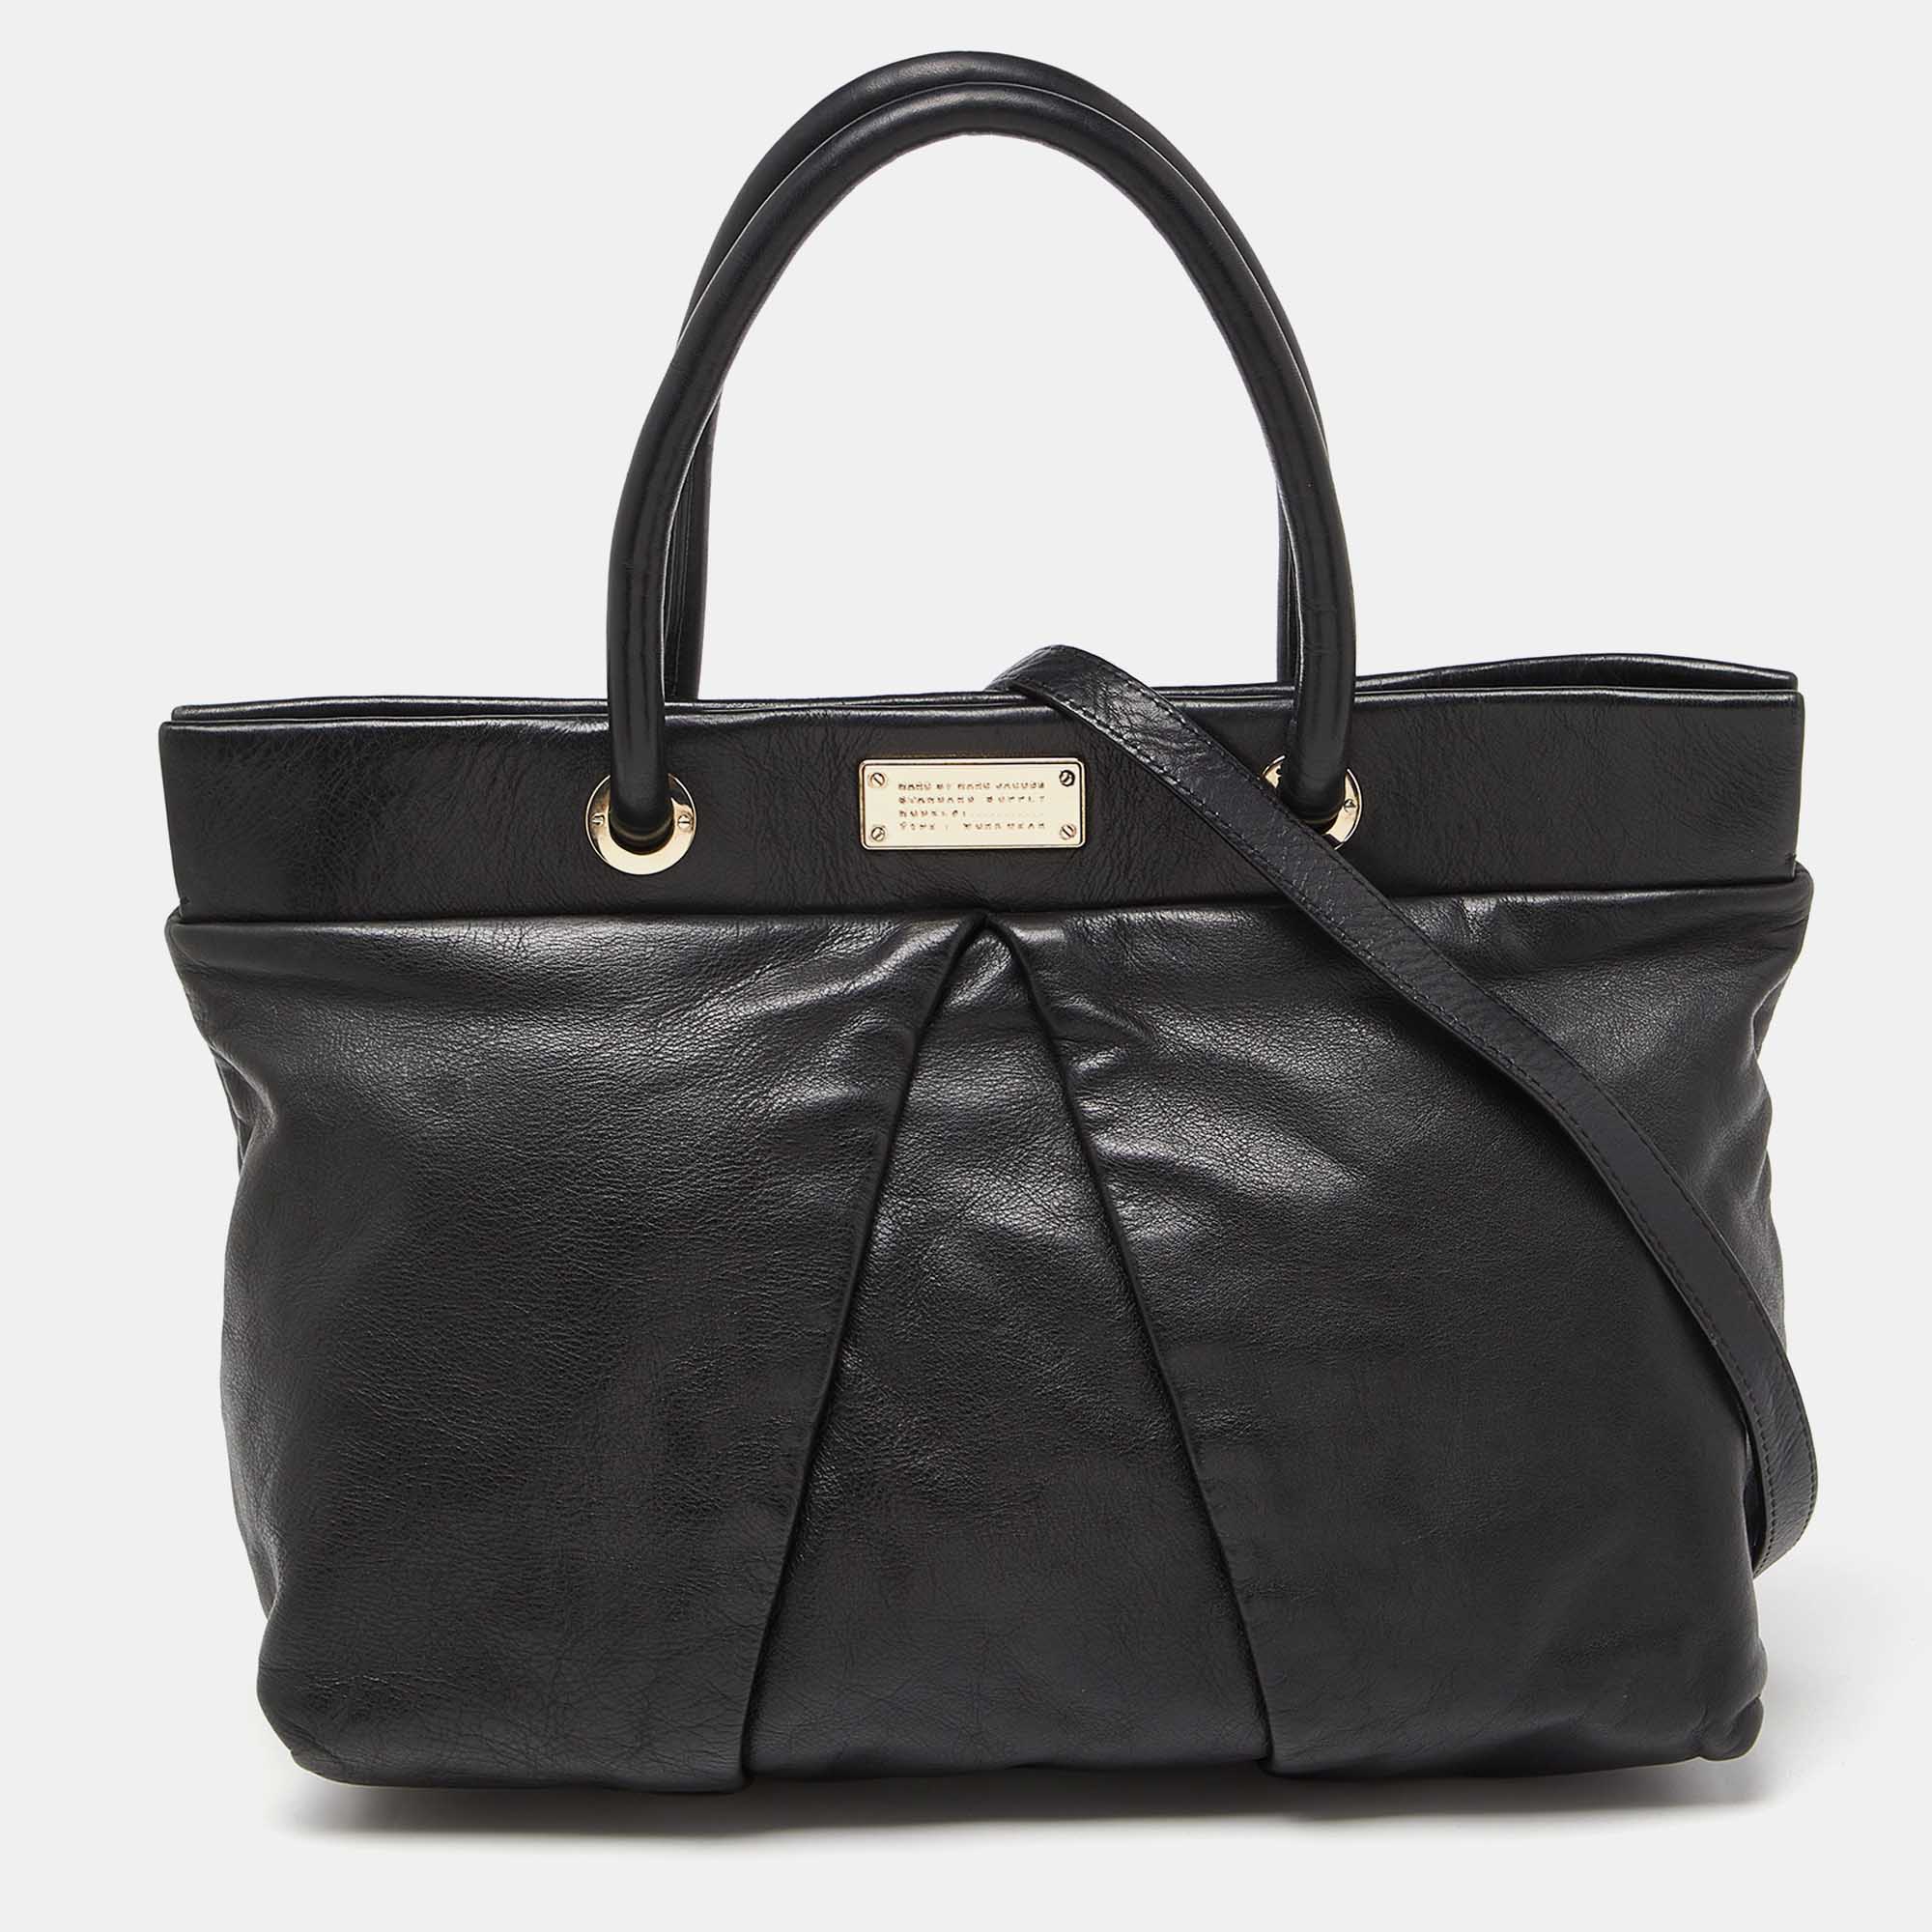 

Marc by Marc Jacobs Black Leather Marchive Tote